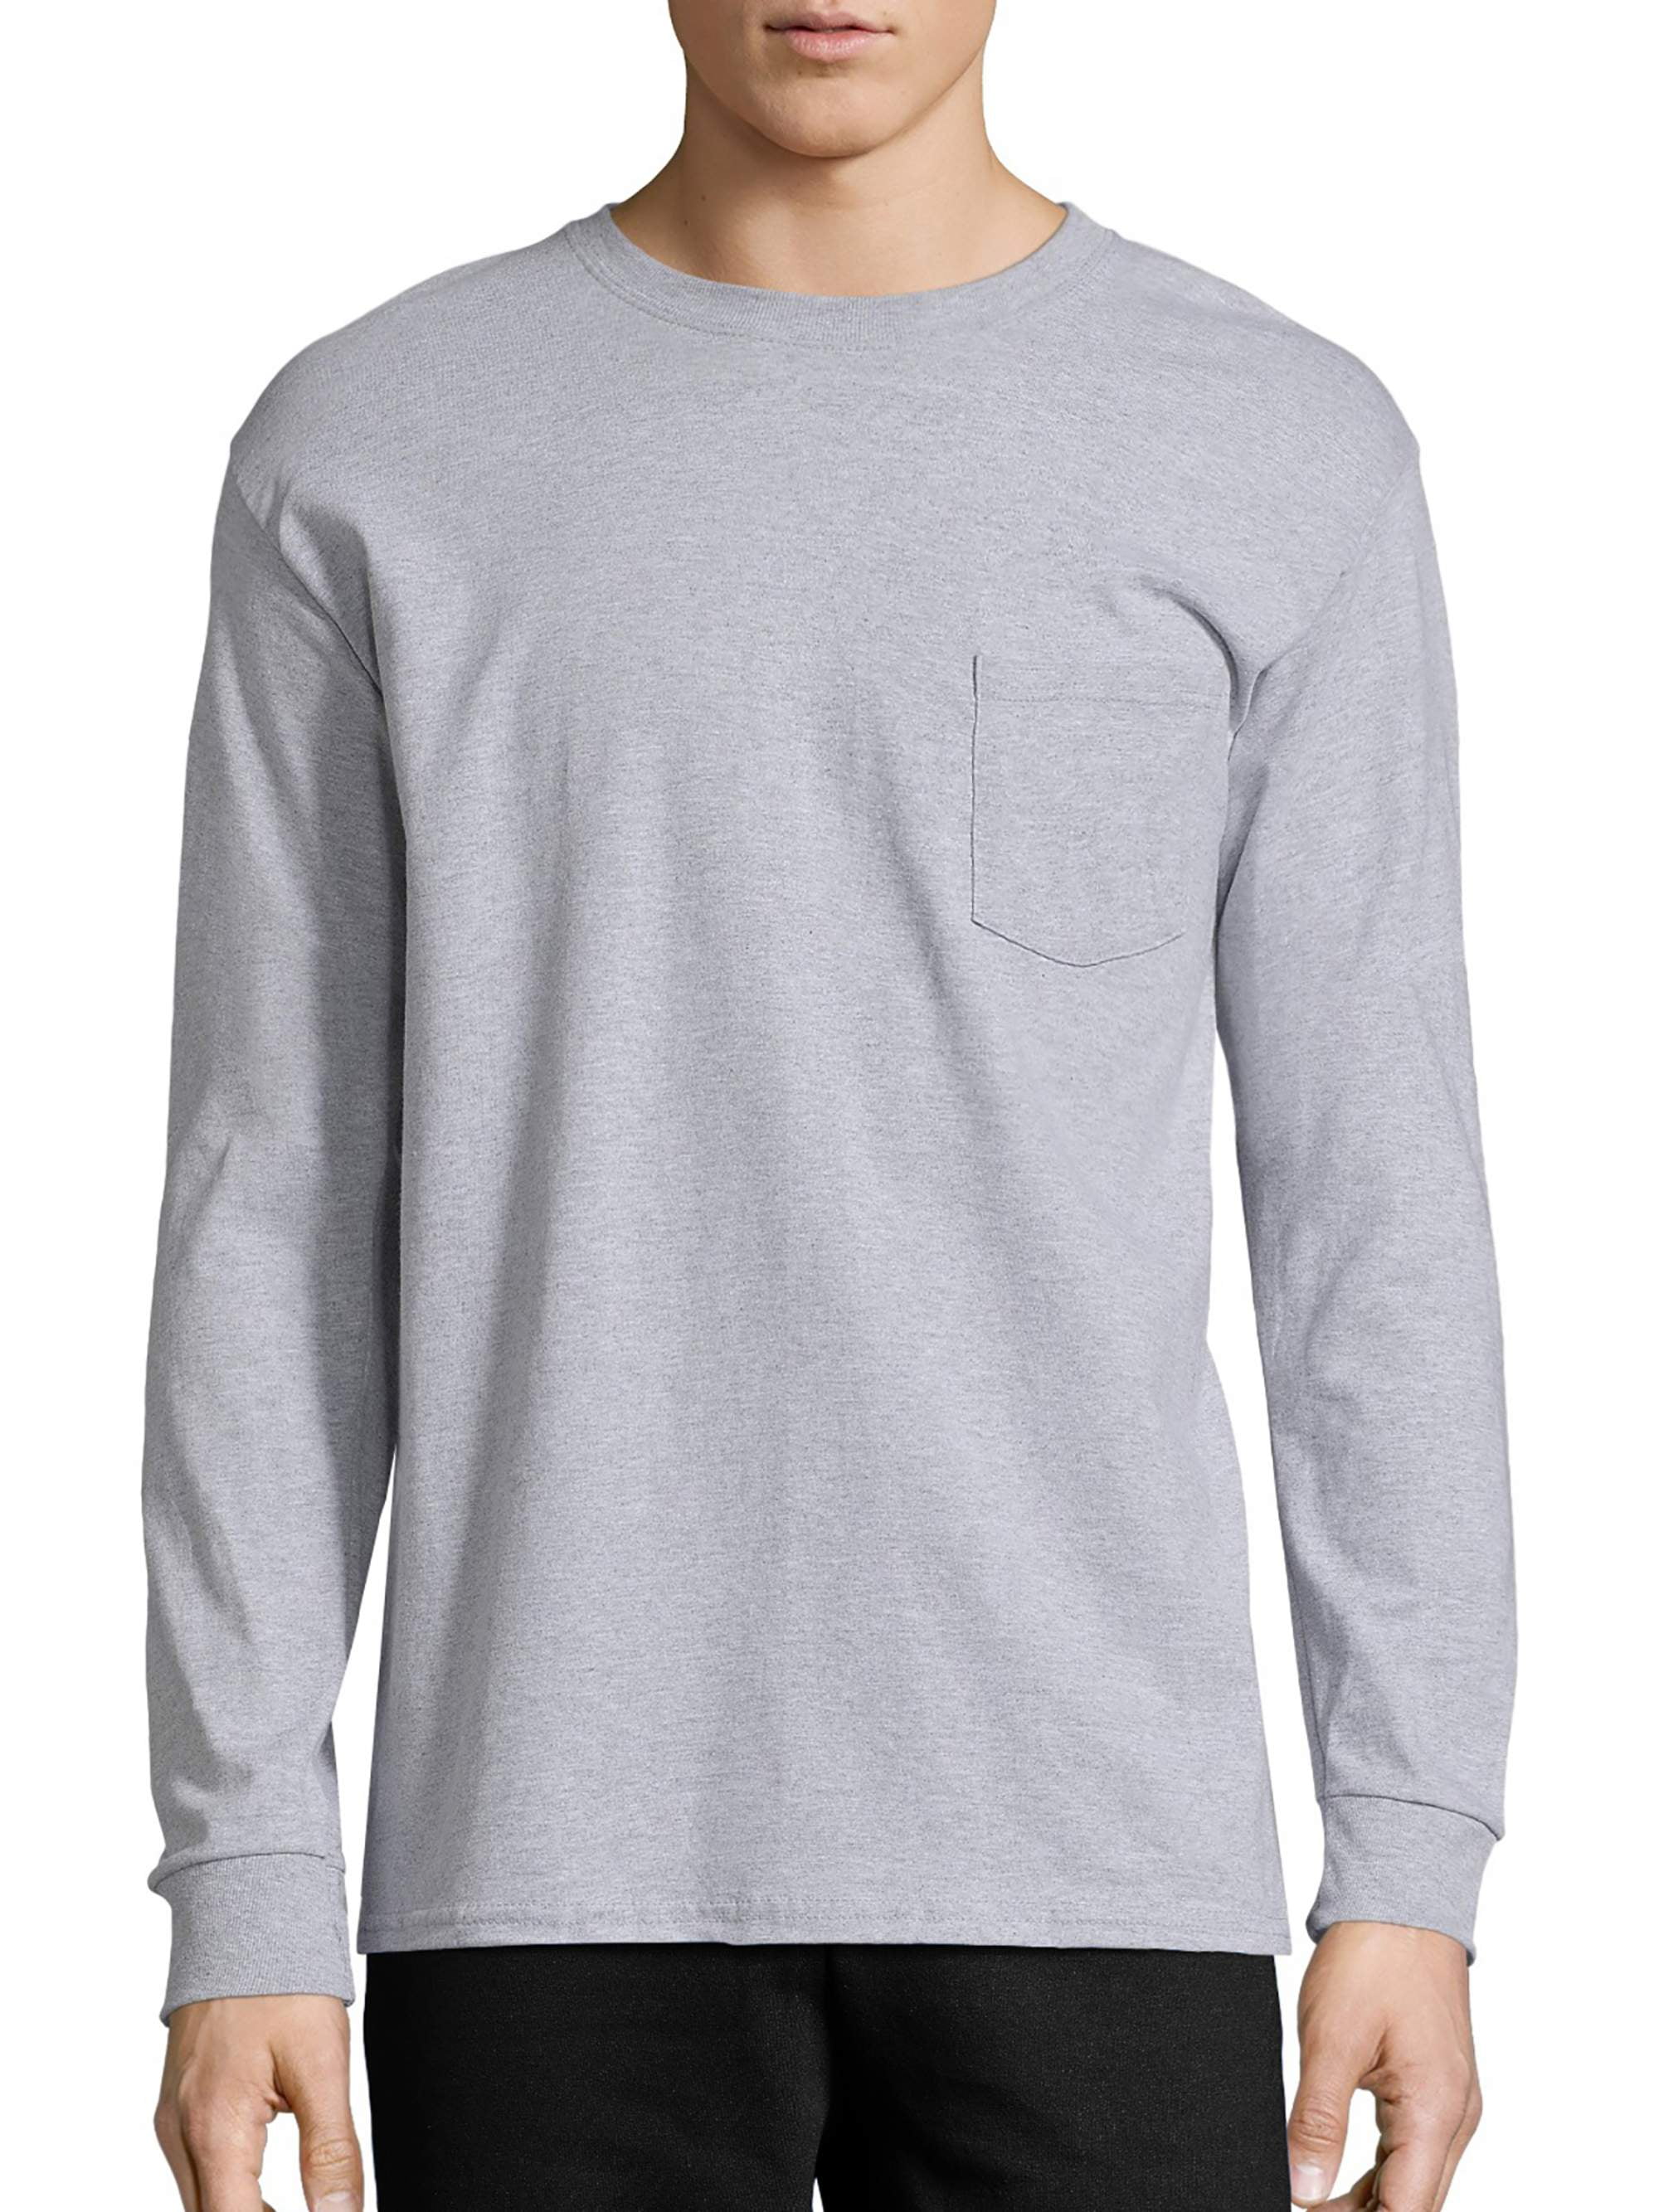 Gray Large Hanes Mens Tagless Cotton Long Sleeve T-Shirt with a Pocket Tee 5596